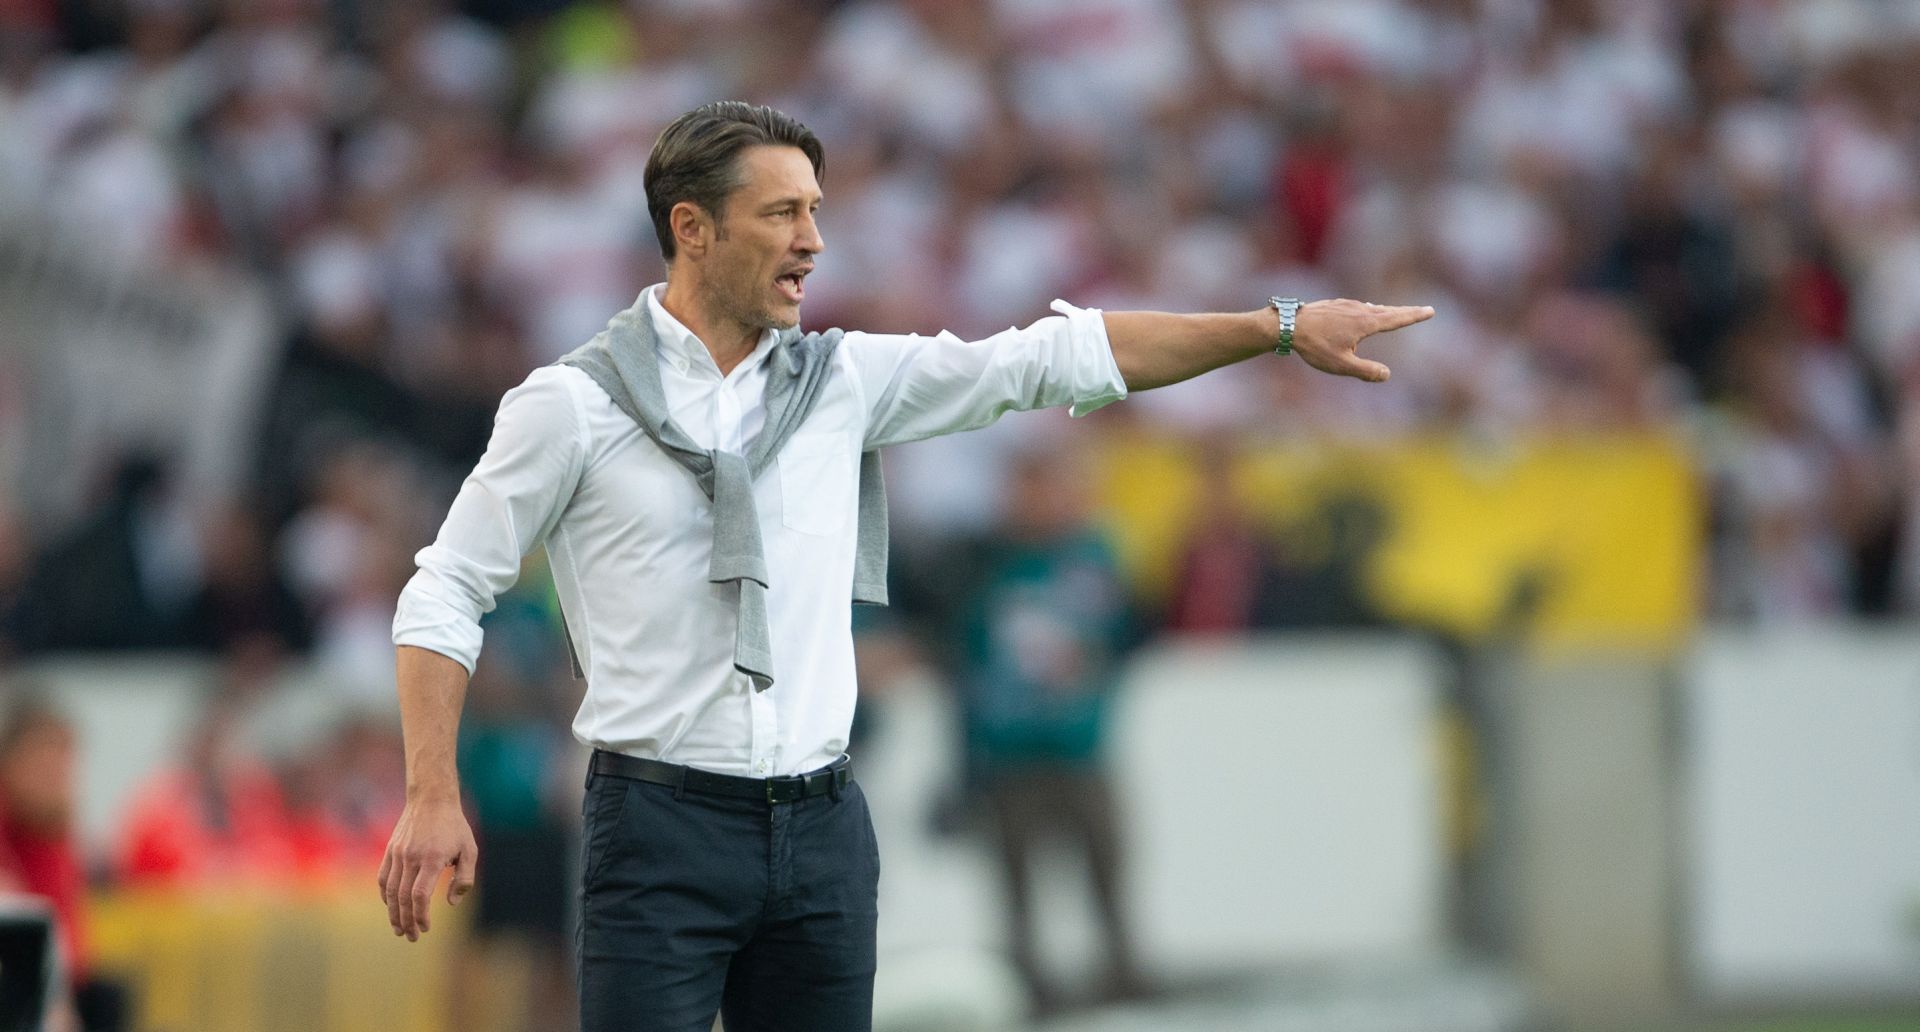 epa06990869 Munich's coach Niko Kovac reacts during the German Bundesliga soccer match between VfB Stuttgart and FC Bayern Munich in Stuttgart, Germany, 01 September 2018.  EPA/DANIEL MAURER CONDITIONS - ATTENTION:  The DFL regulations prohibit any use of photographs as image sequences and/or quasi-video.